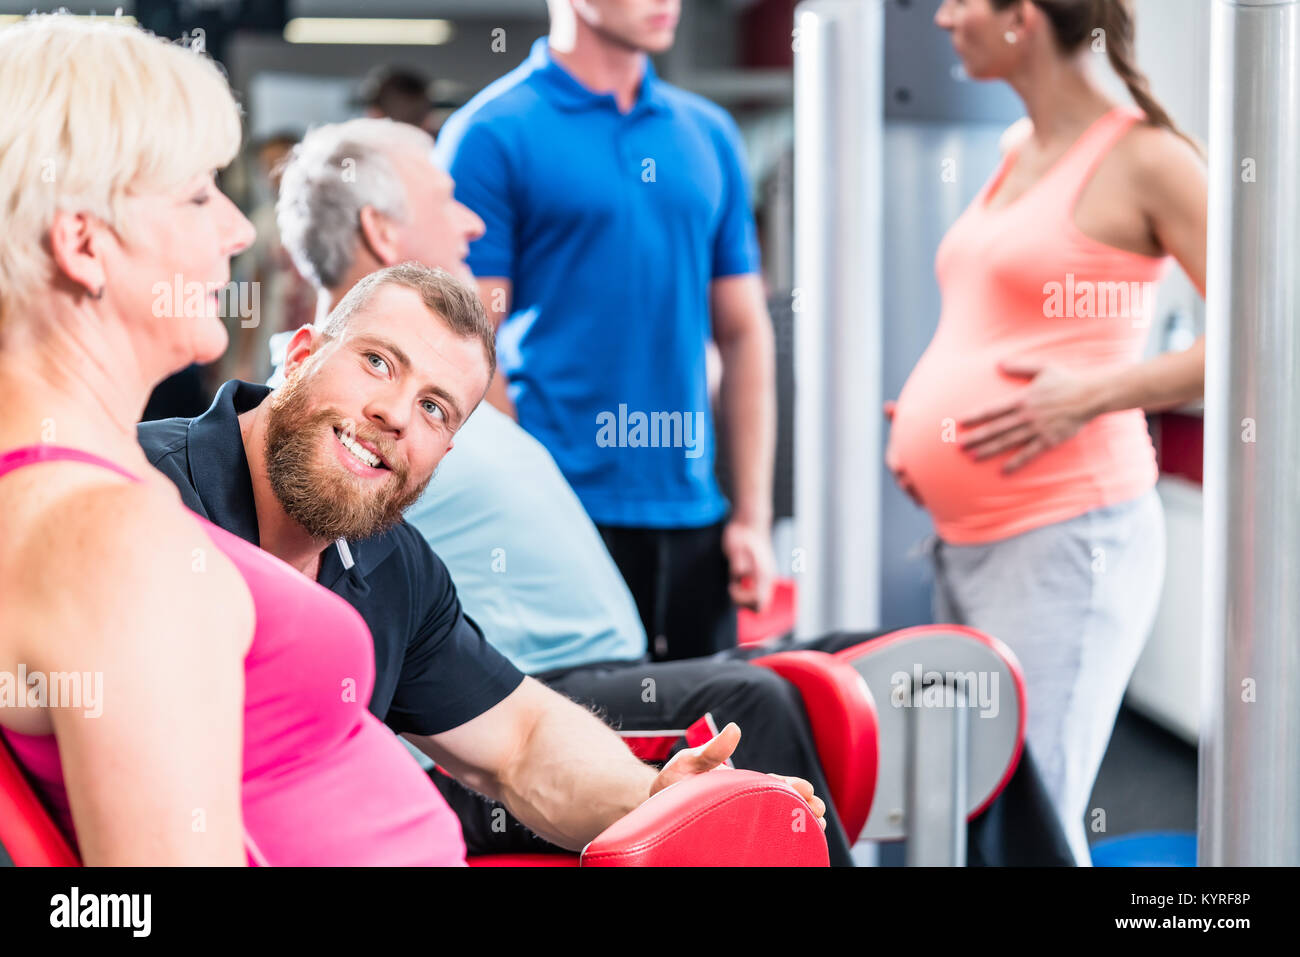 Senior woman in group with pregnant woman working out at the gym Stock Photo